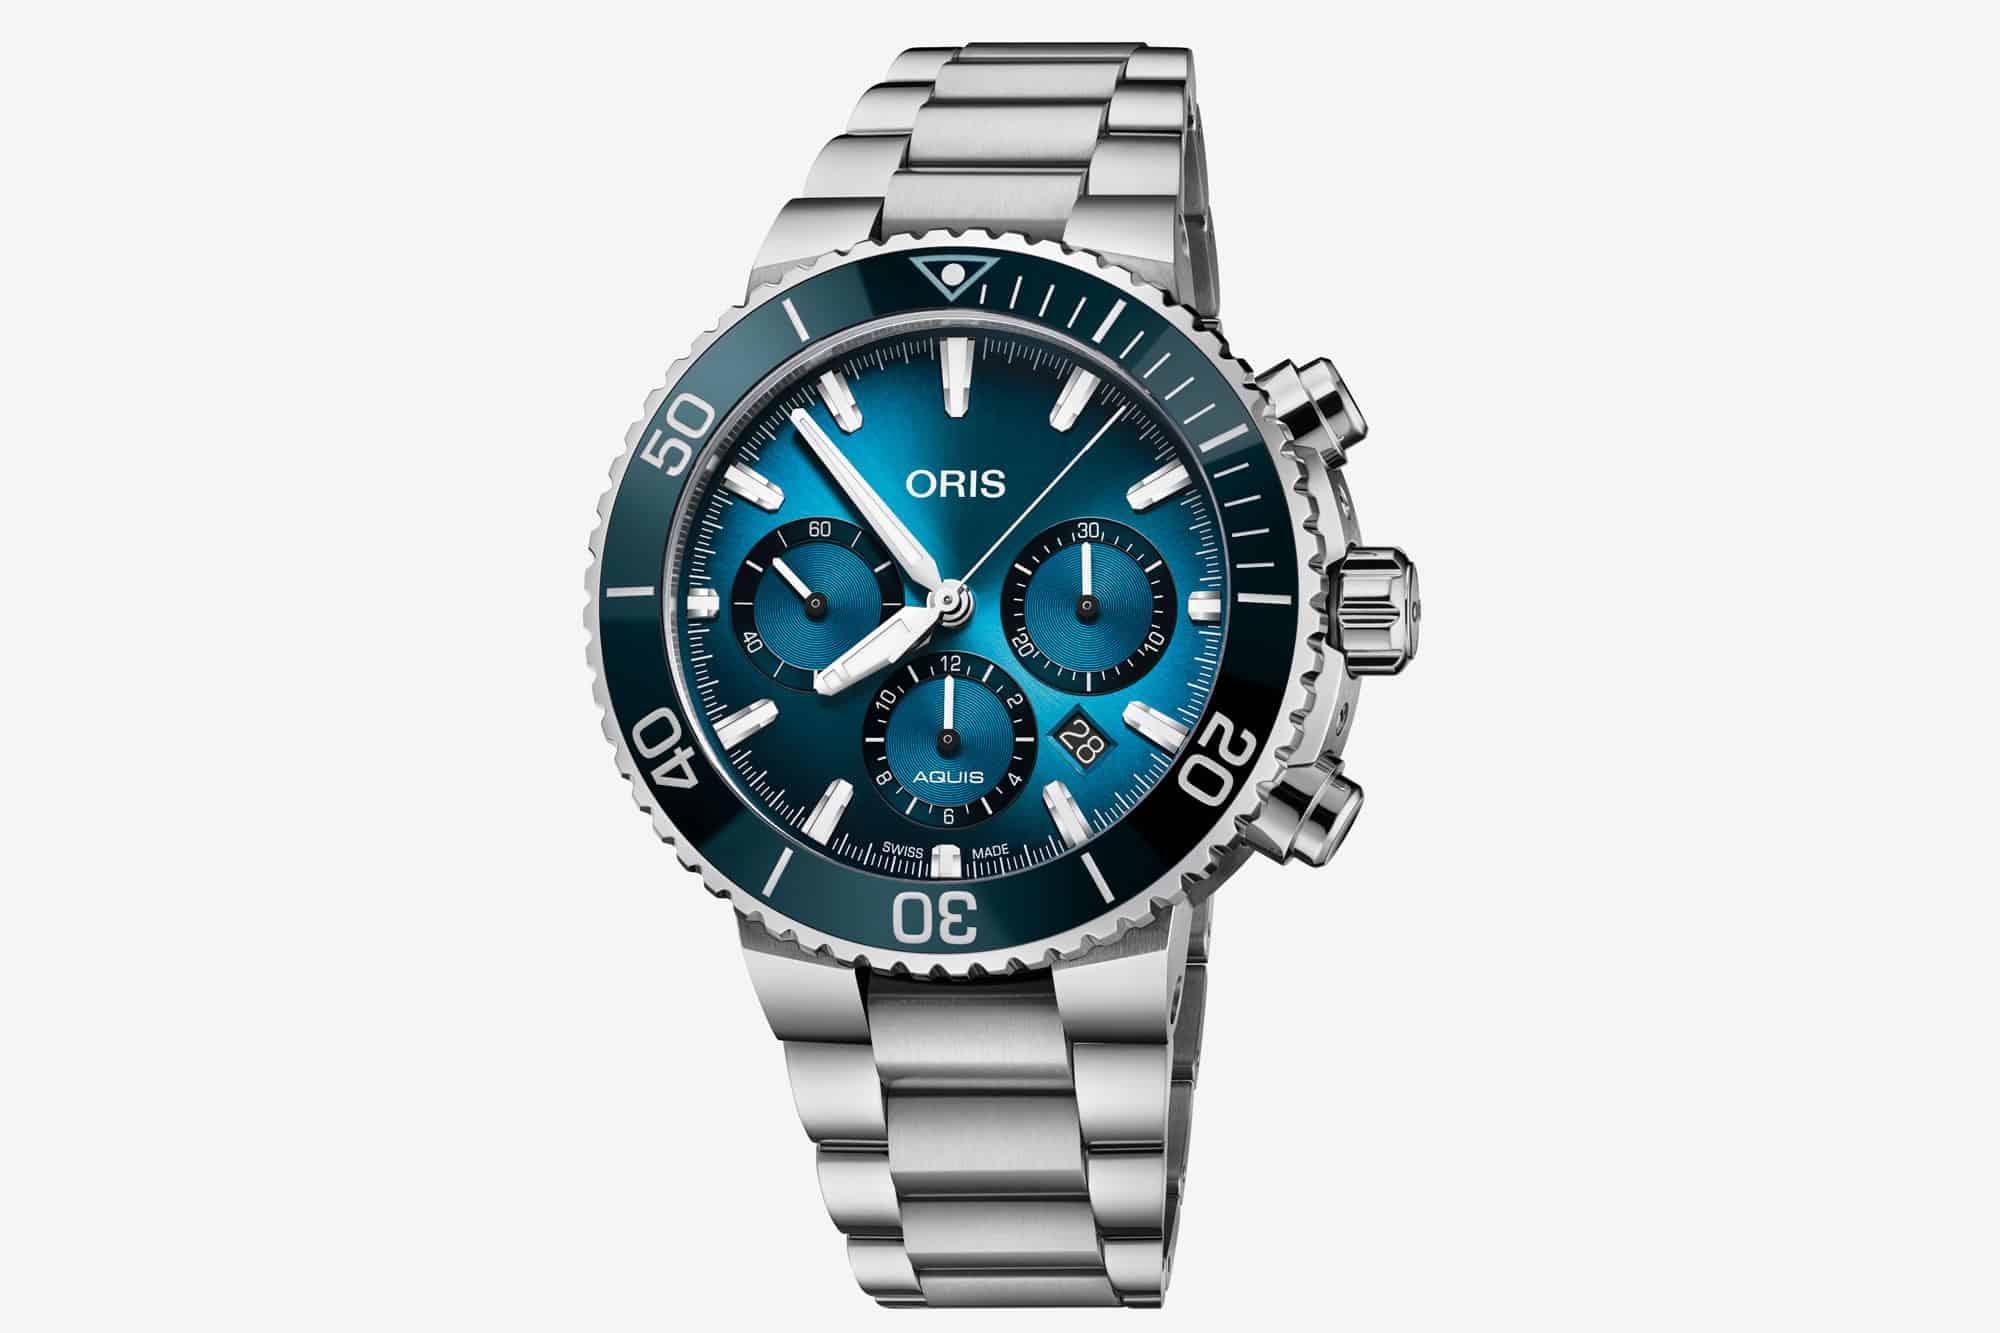 Introducing the Oris Blue Whale Limited Edition Chronograph and the Ocean Trilogy Collection